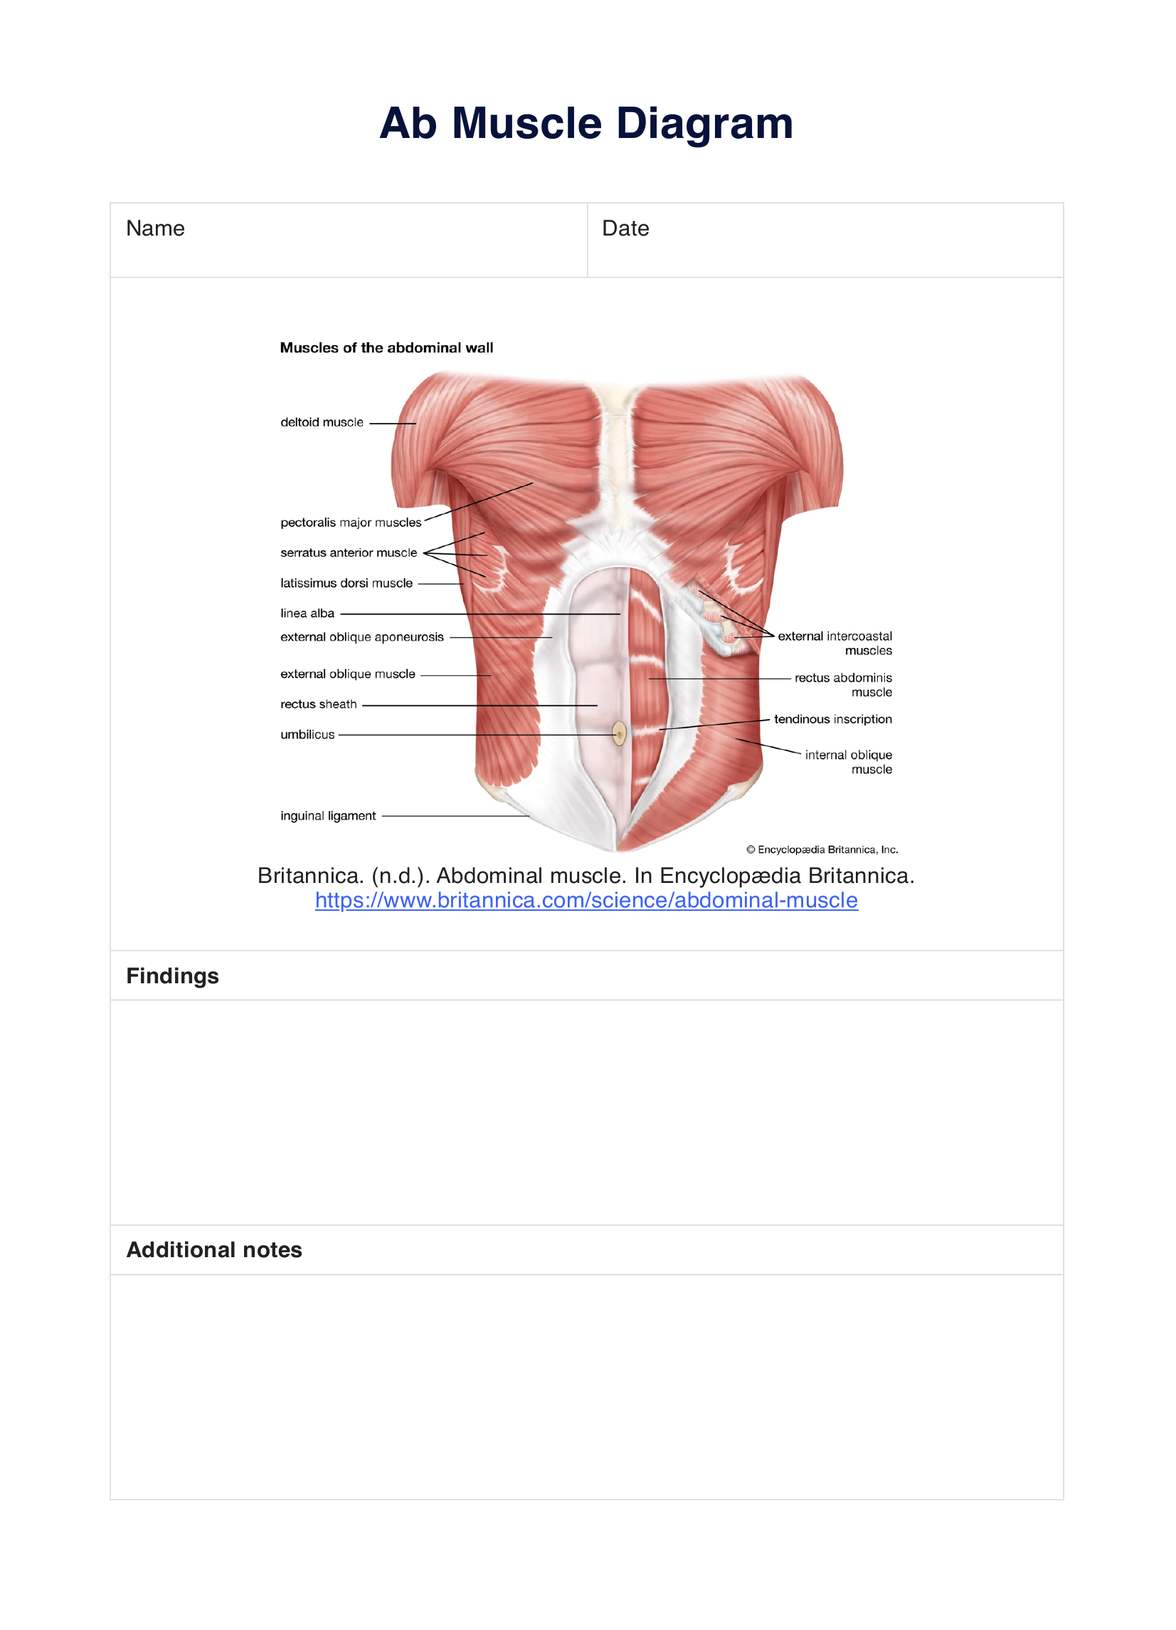 Ab Muscle Diagram PDF Example